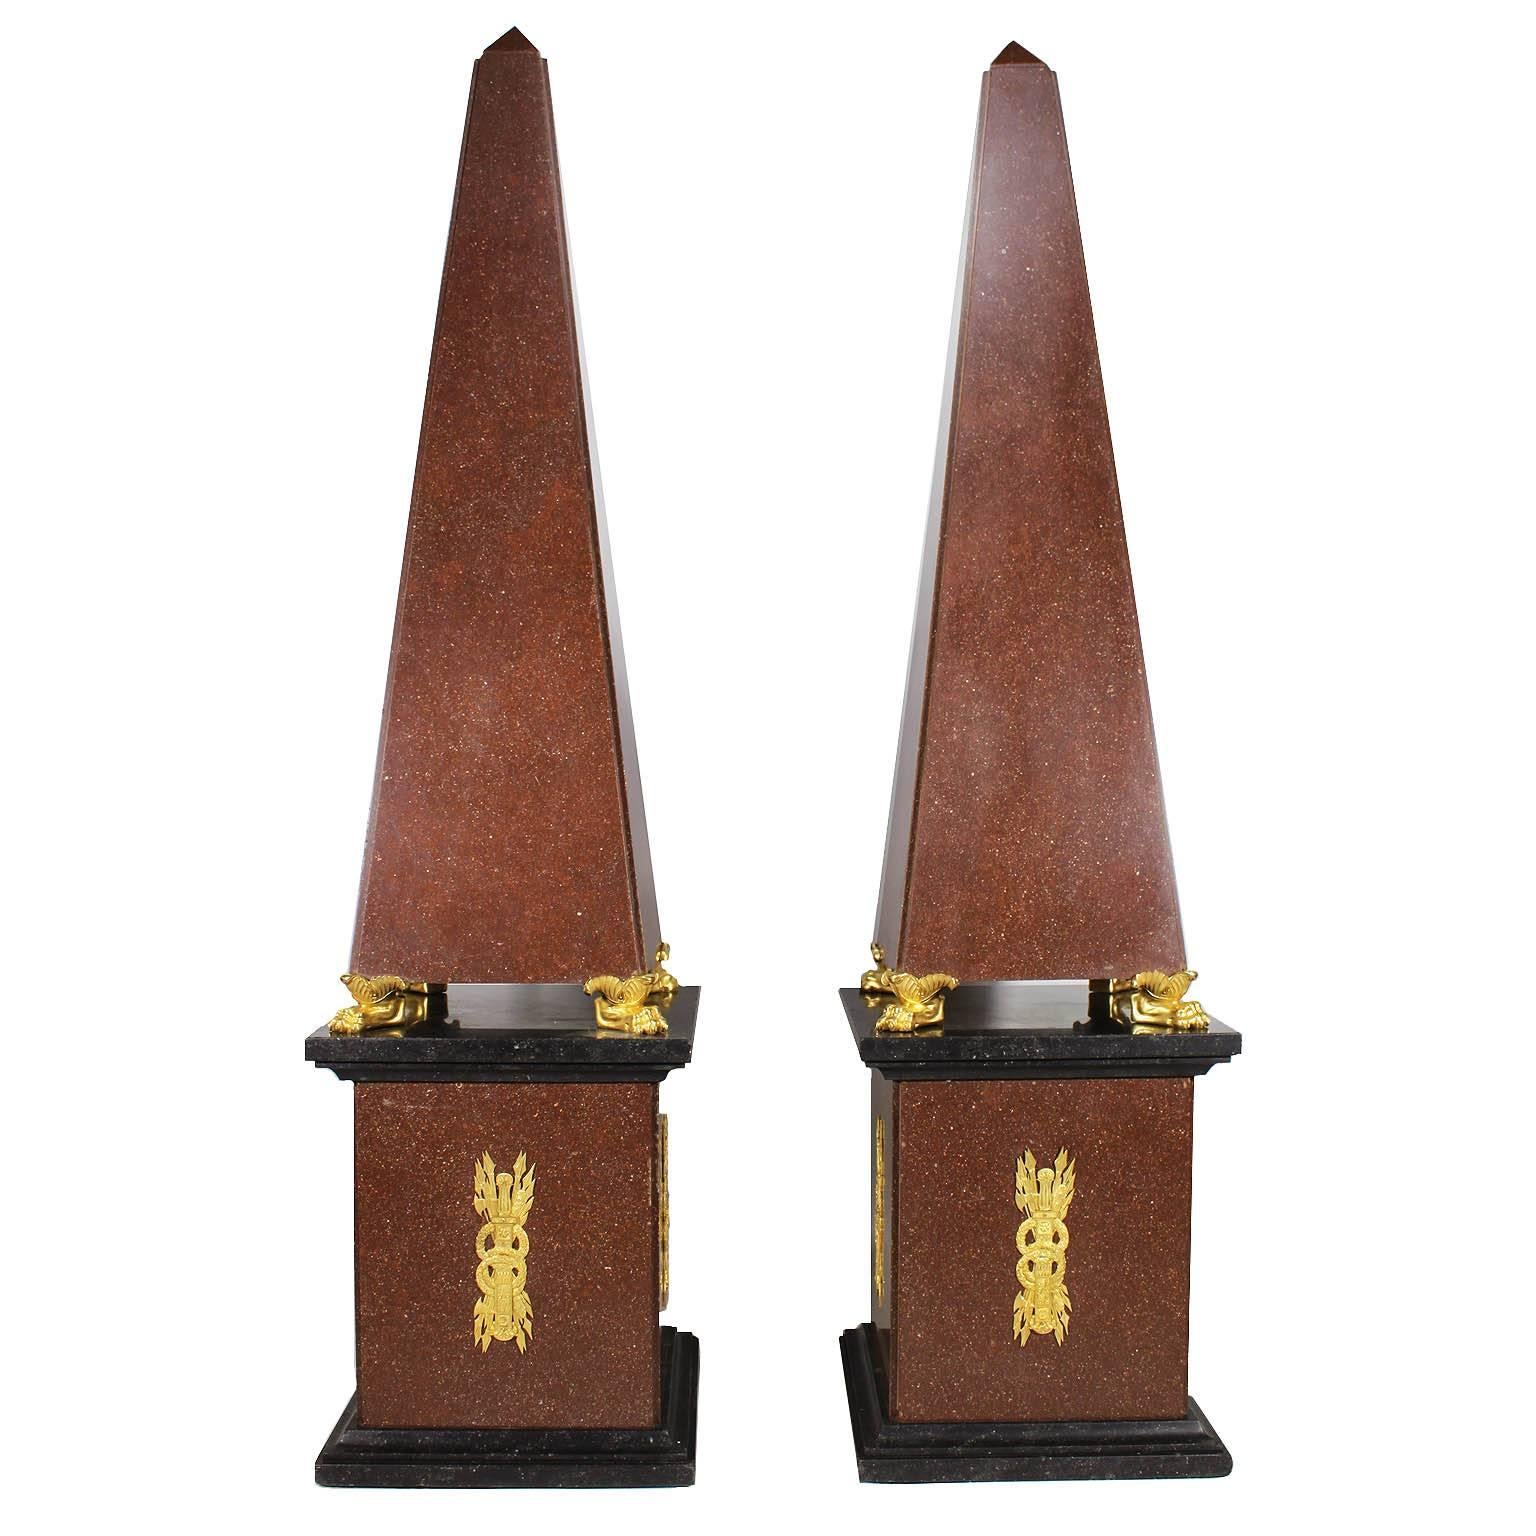 A Monumental and Fine Pair of French 19th, 20th Century Empire Style Red Porphyry-Like Granite and Gilt-Bronze (Ormolu) Mounted Obelisks on Four Gilt-Bronze Lion Paws both resting on conforming porphyry and black slate plinths surmounted with